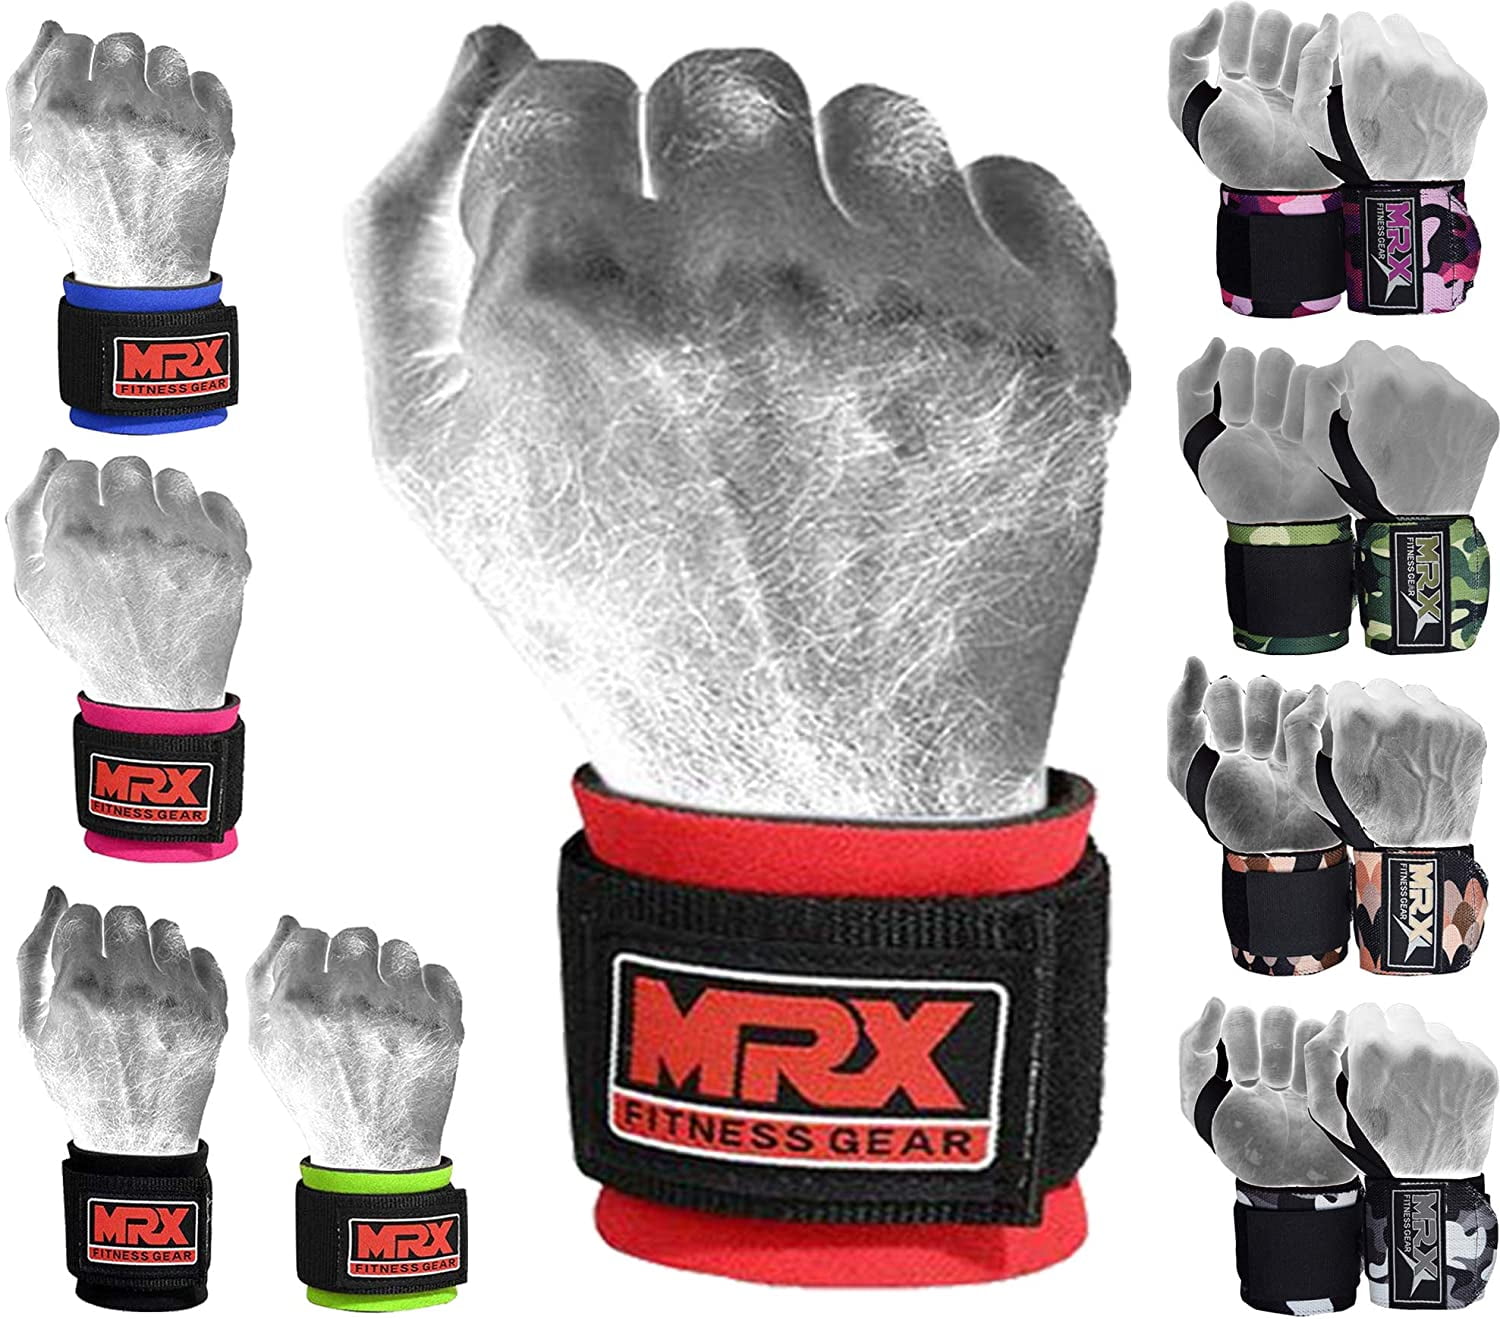 WEIGHTLIFTING WRIST SUPPORT WRAPS/STRAPS CROSSFIT POWERLIFTING TRAINING GYM 